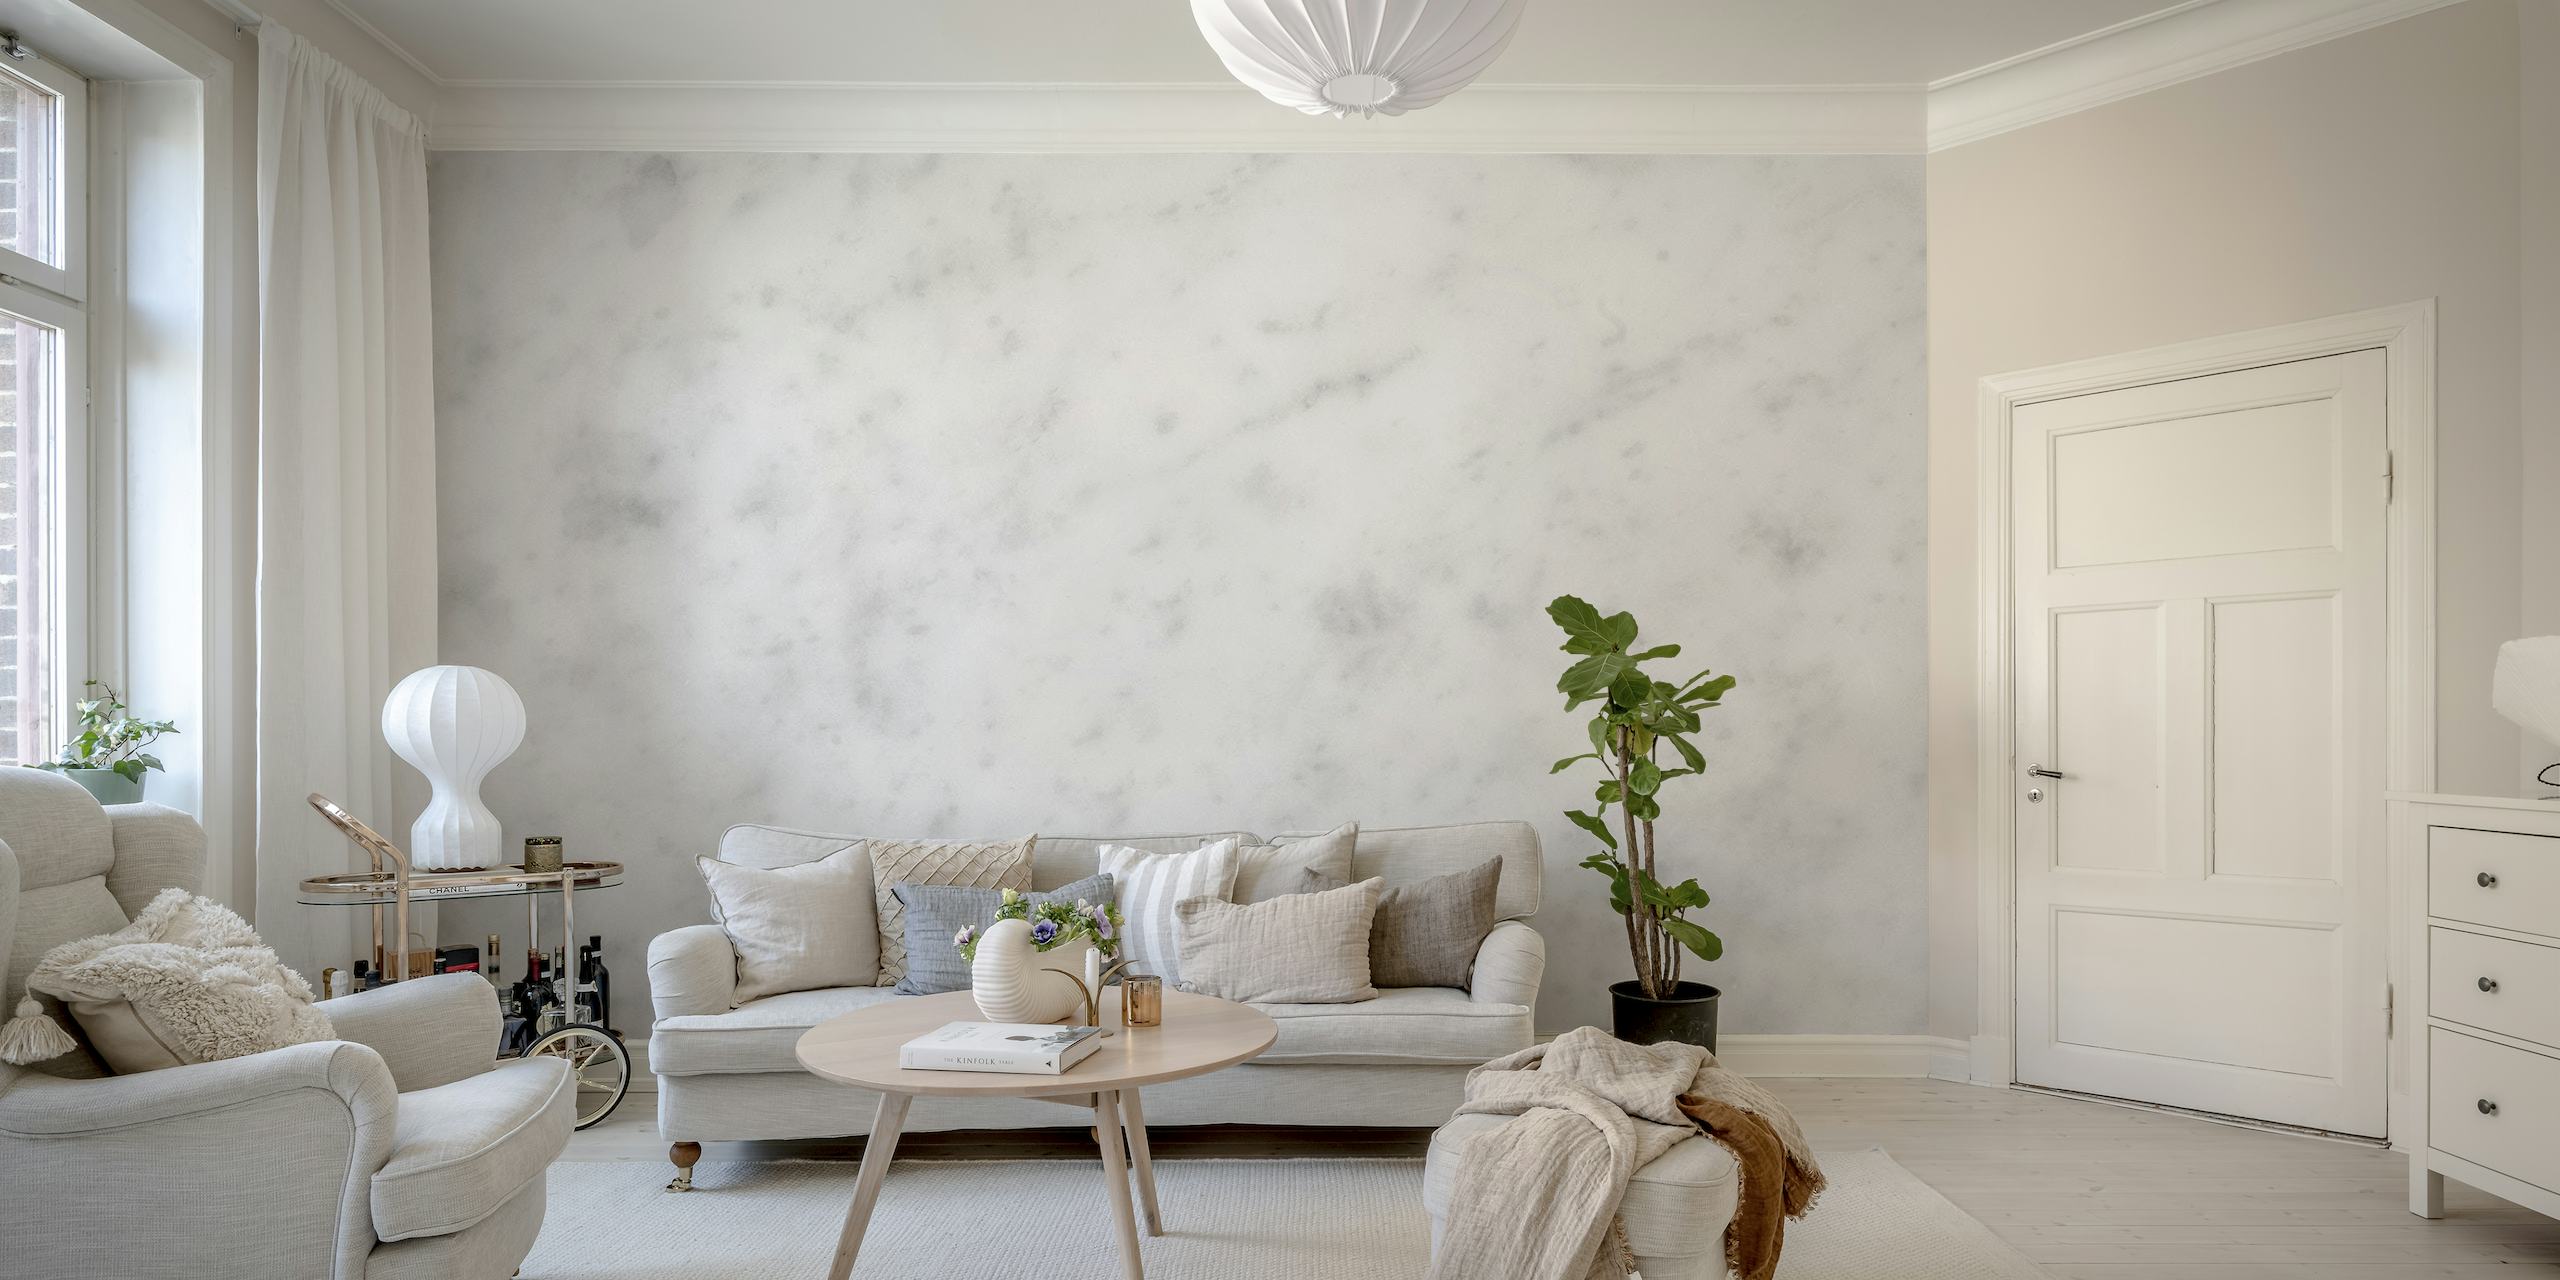 Elegant white marble wall mural with subtle grey veining